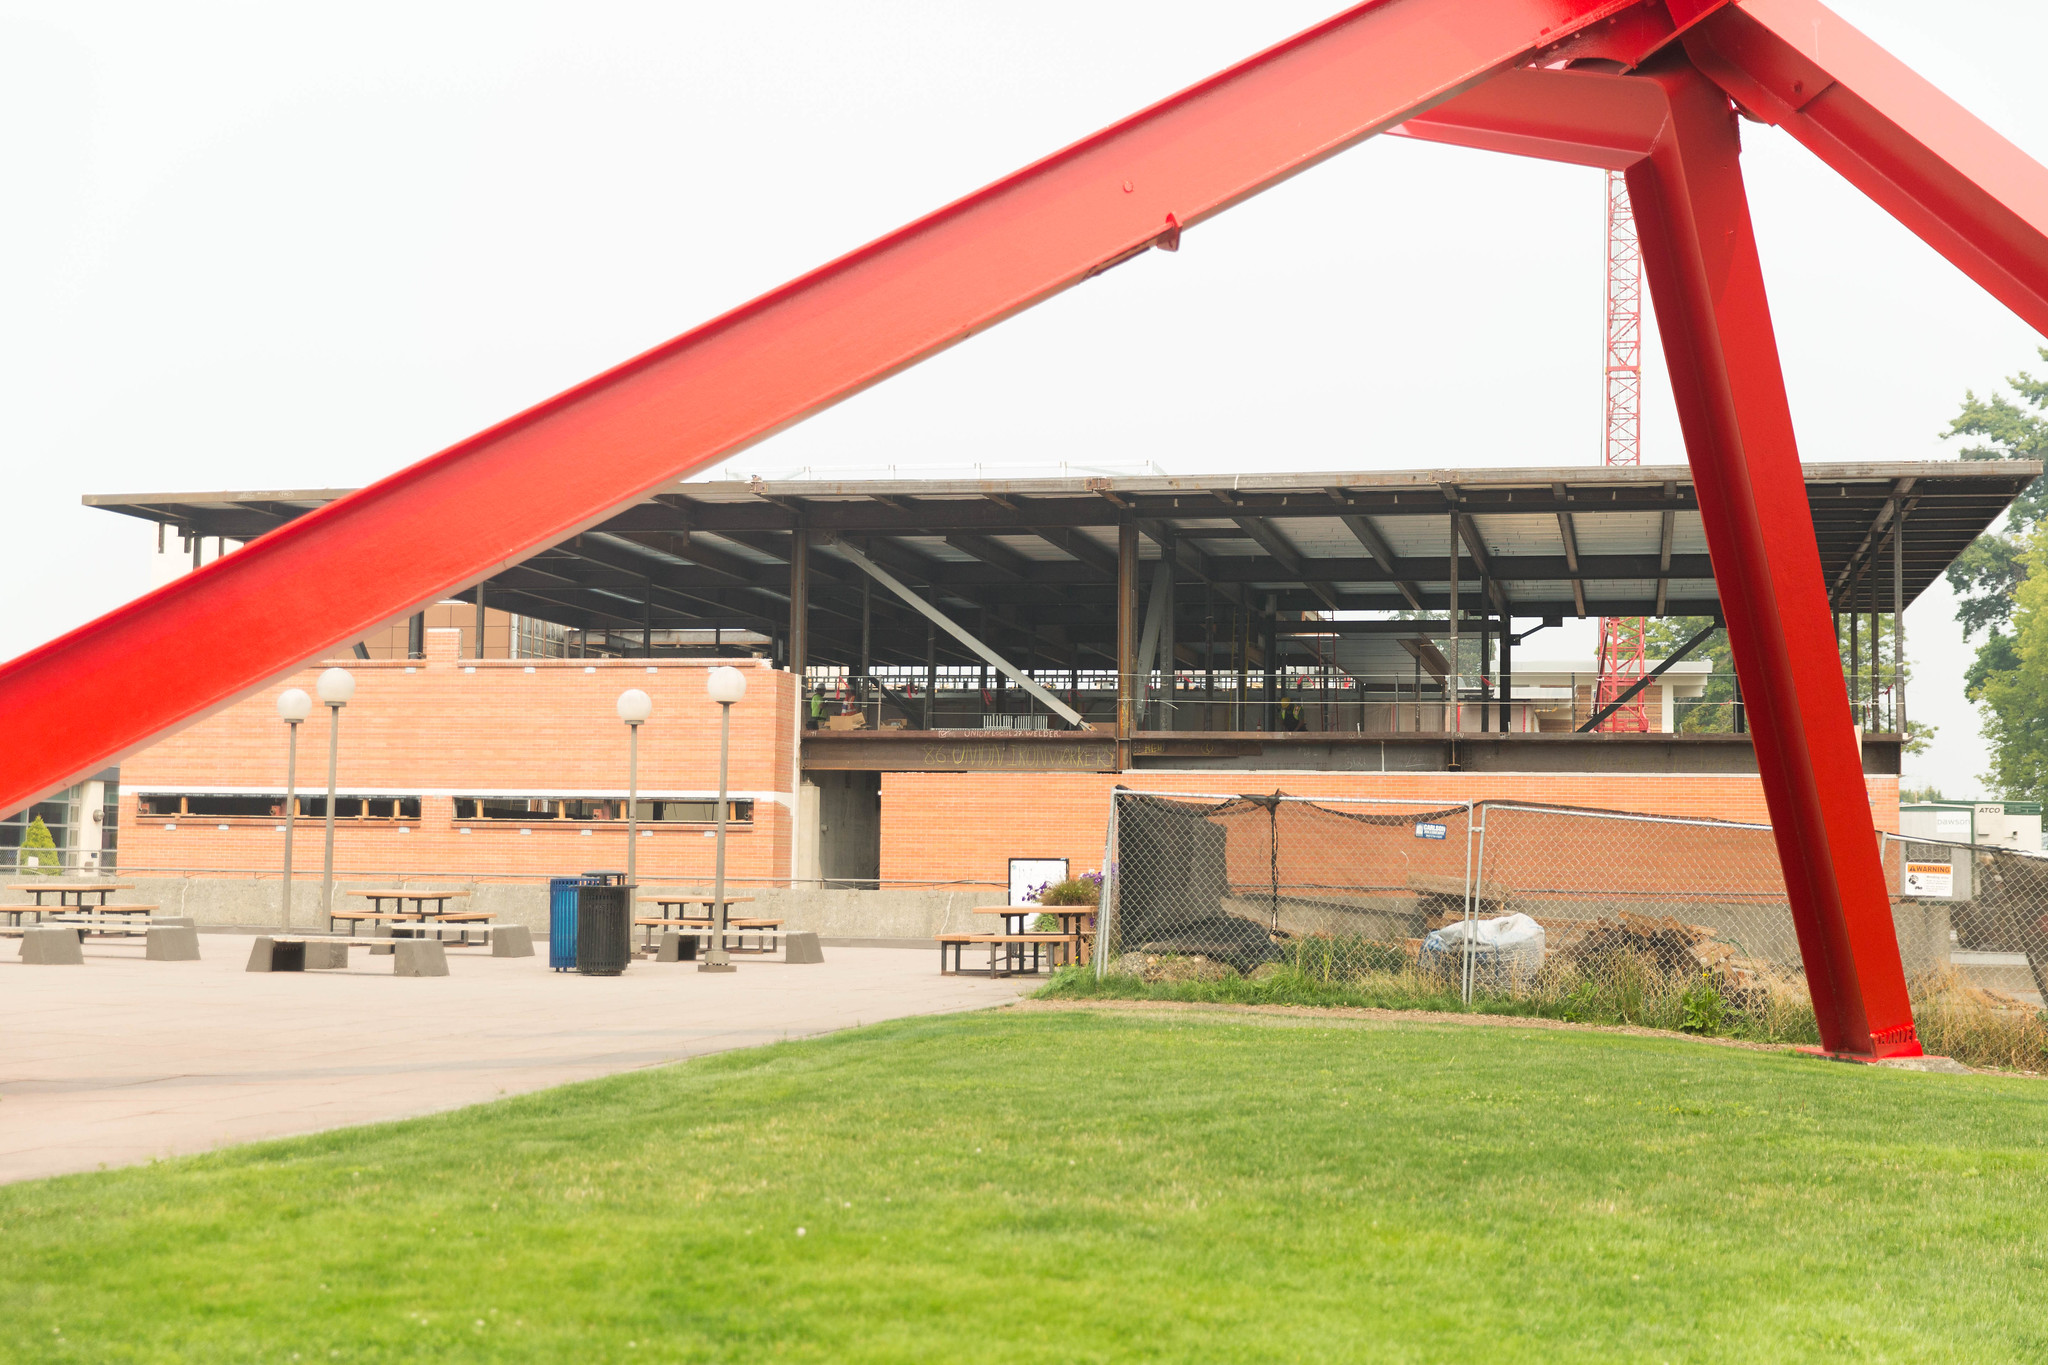 Photo of giant red sculpture on WWU Campus - Link to Facilities Maintenance